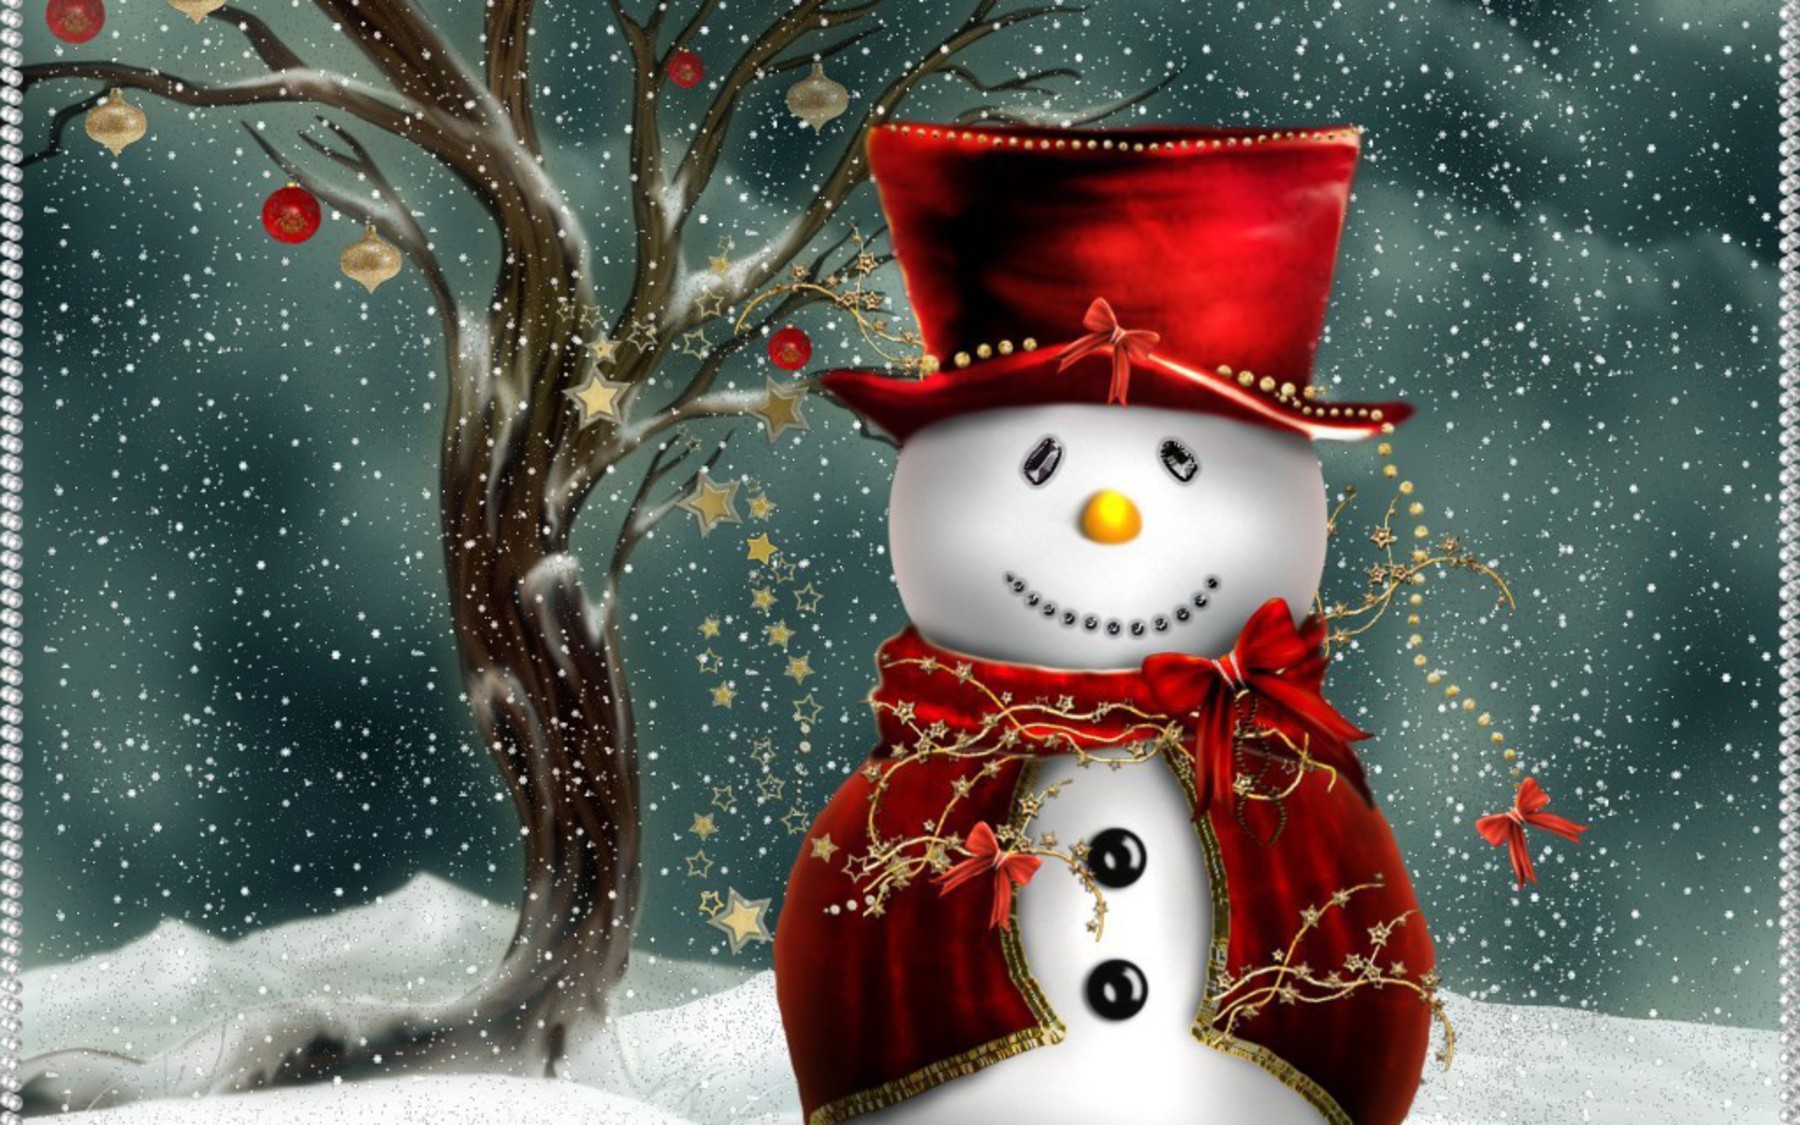 red cap on snowman image